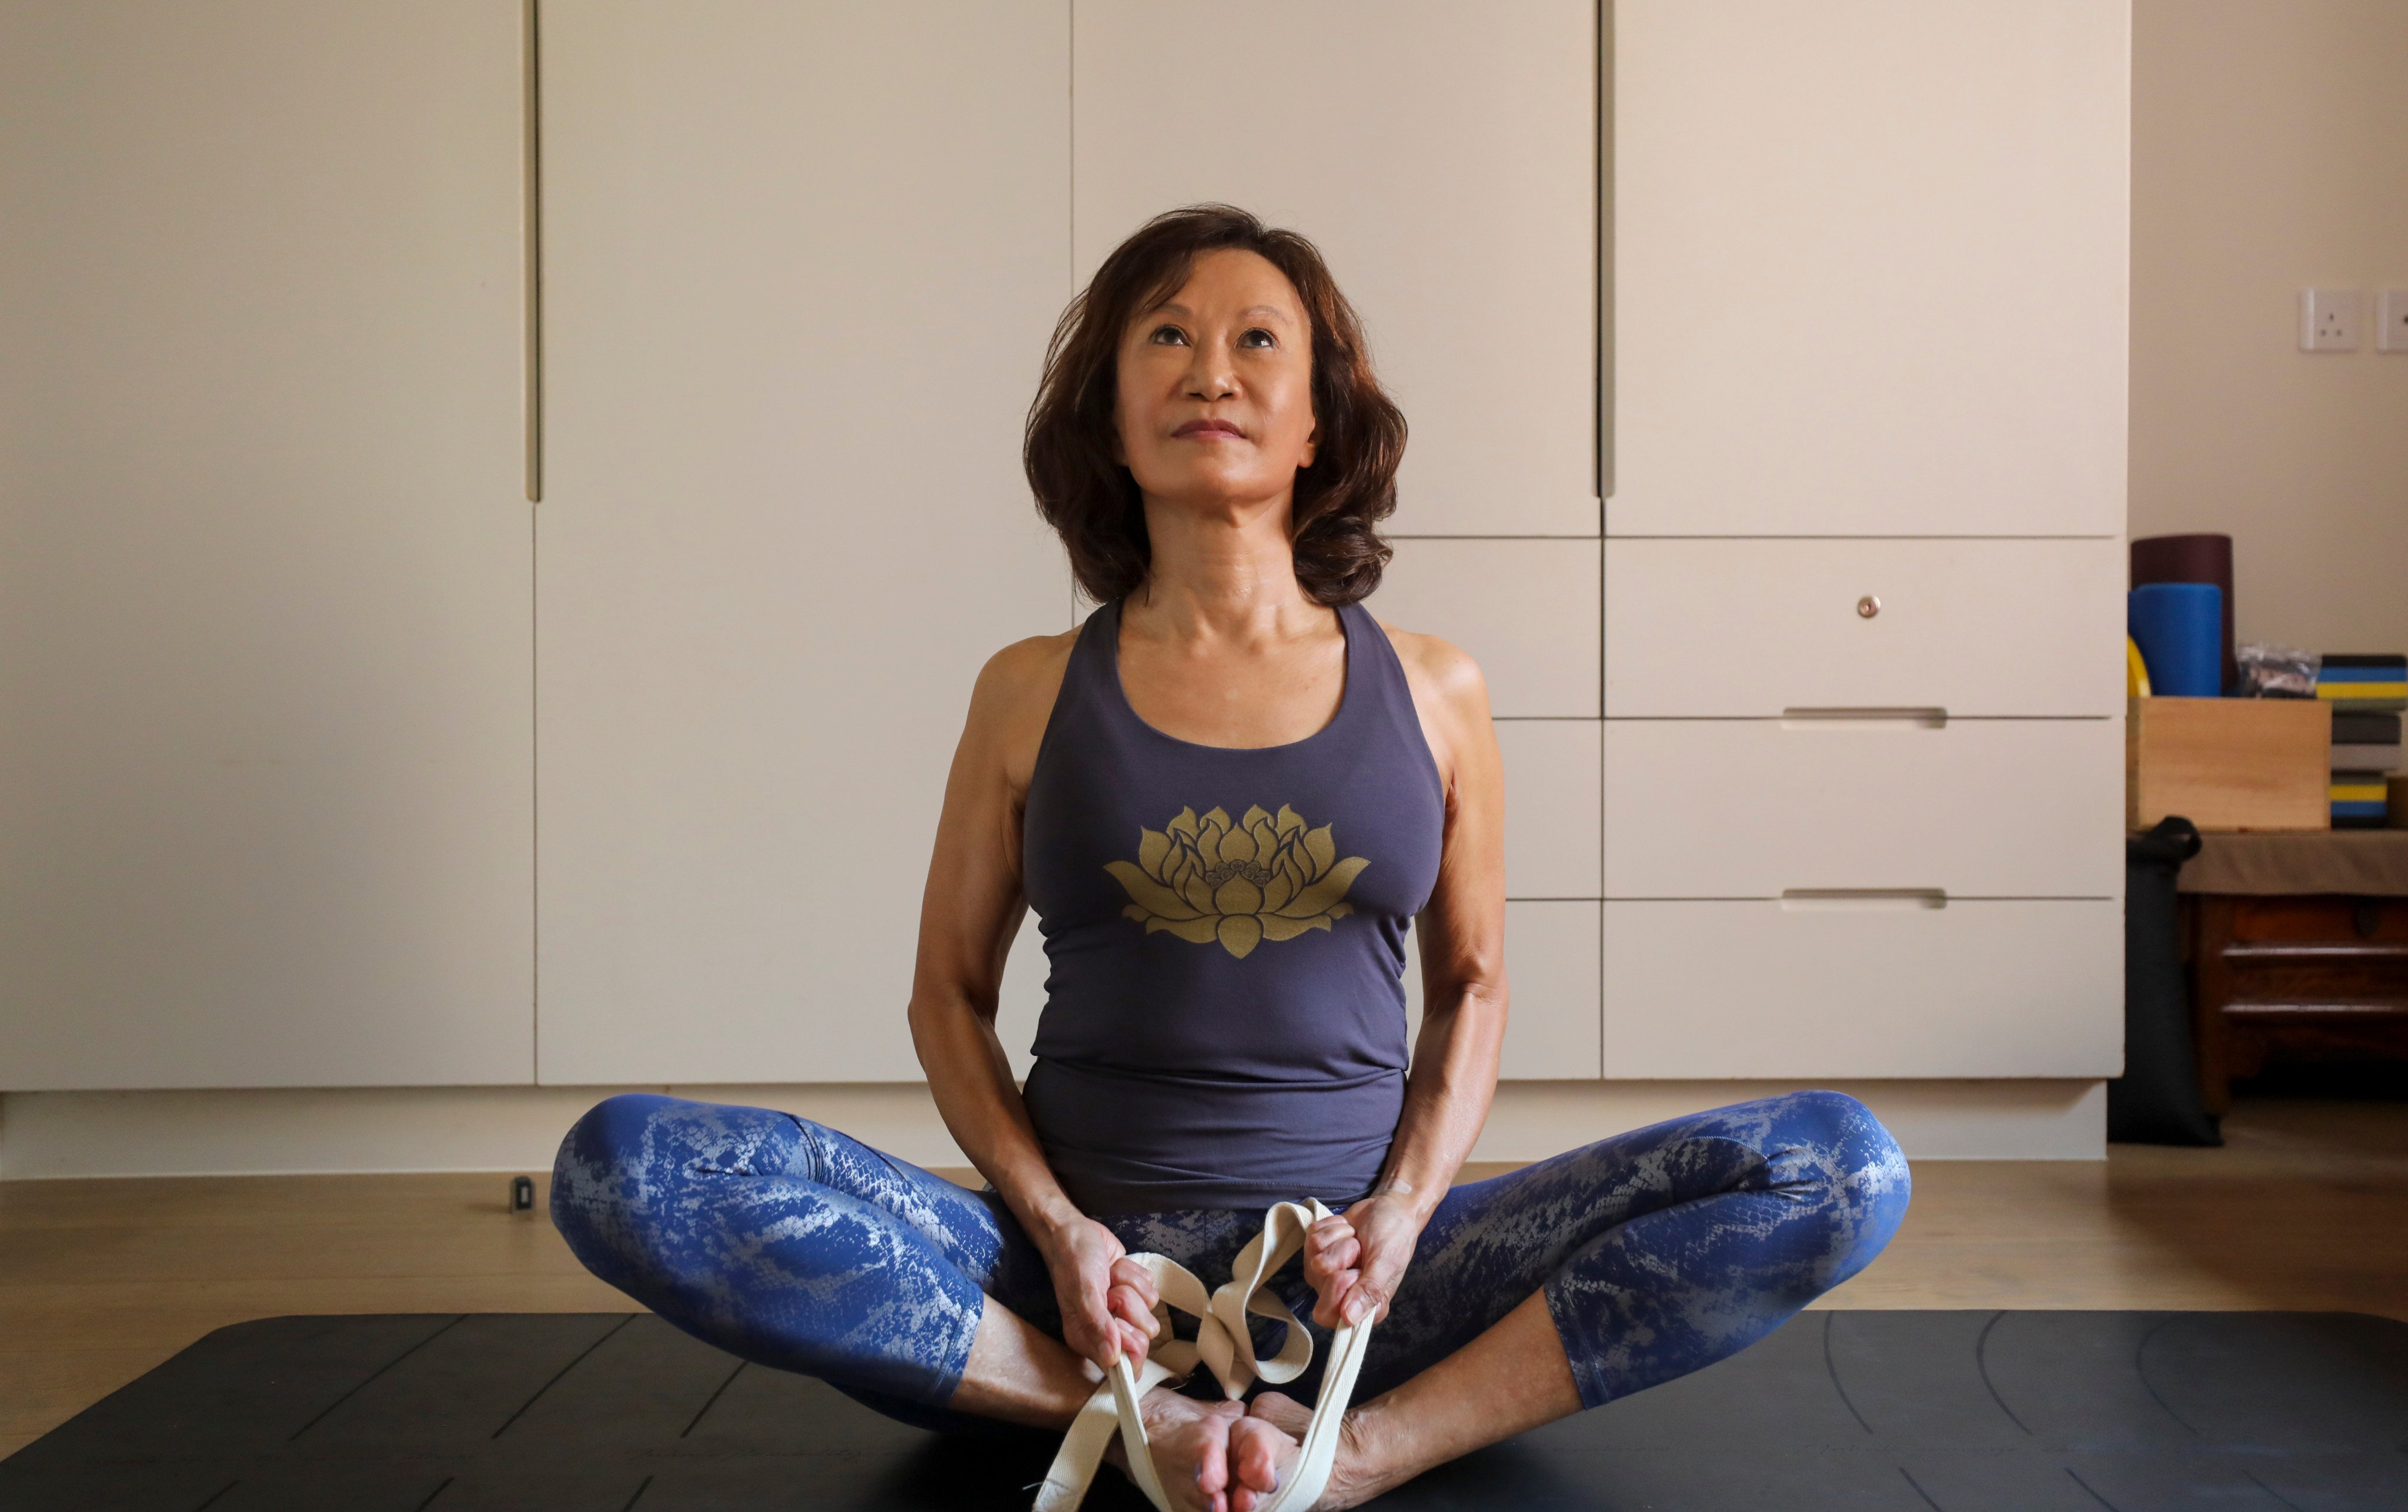 Theresa Brickley does yoga at her home in Tai Tam, Hong Kong. The 69-year-old says keeping fit while listening to your body is key to slowing the ageing process. Photo: Xiaomei Chen